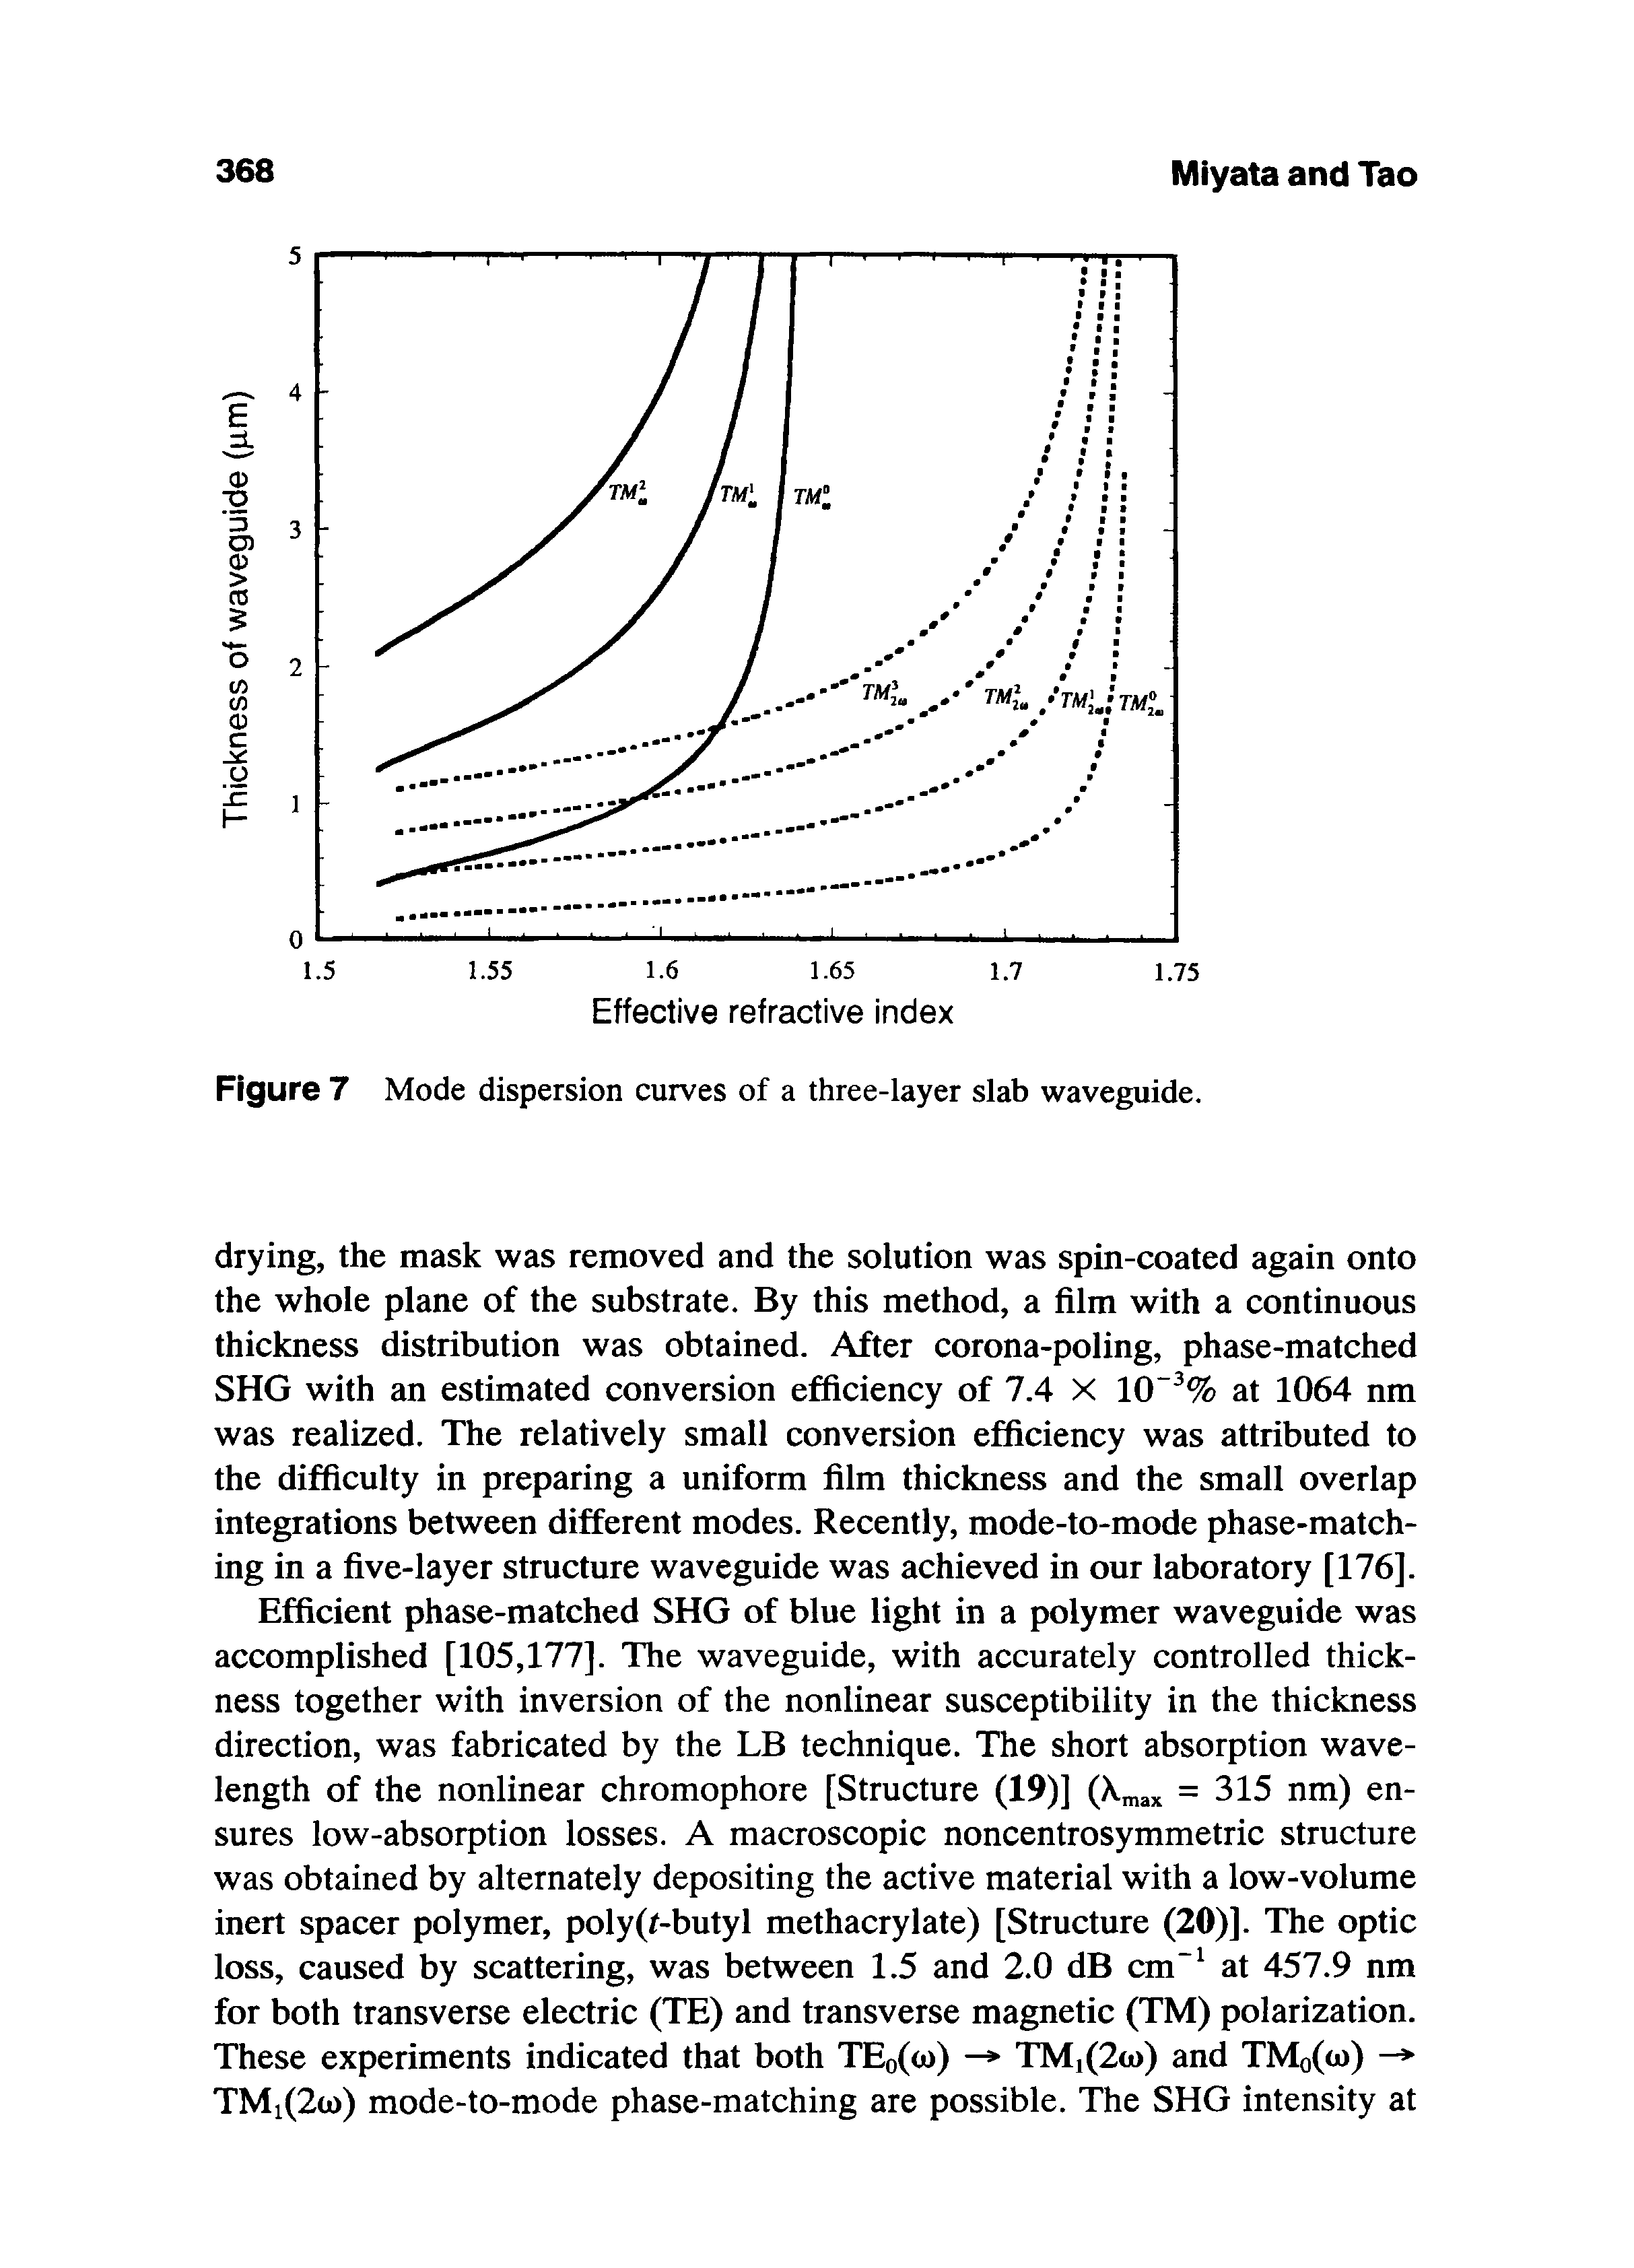 Figure 7 Mode dispersion curves of a three-layer slab waveguide.